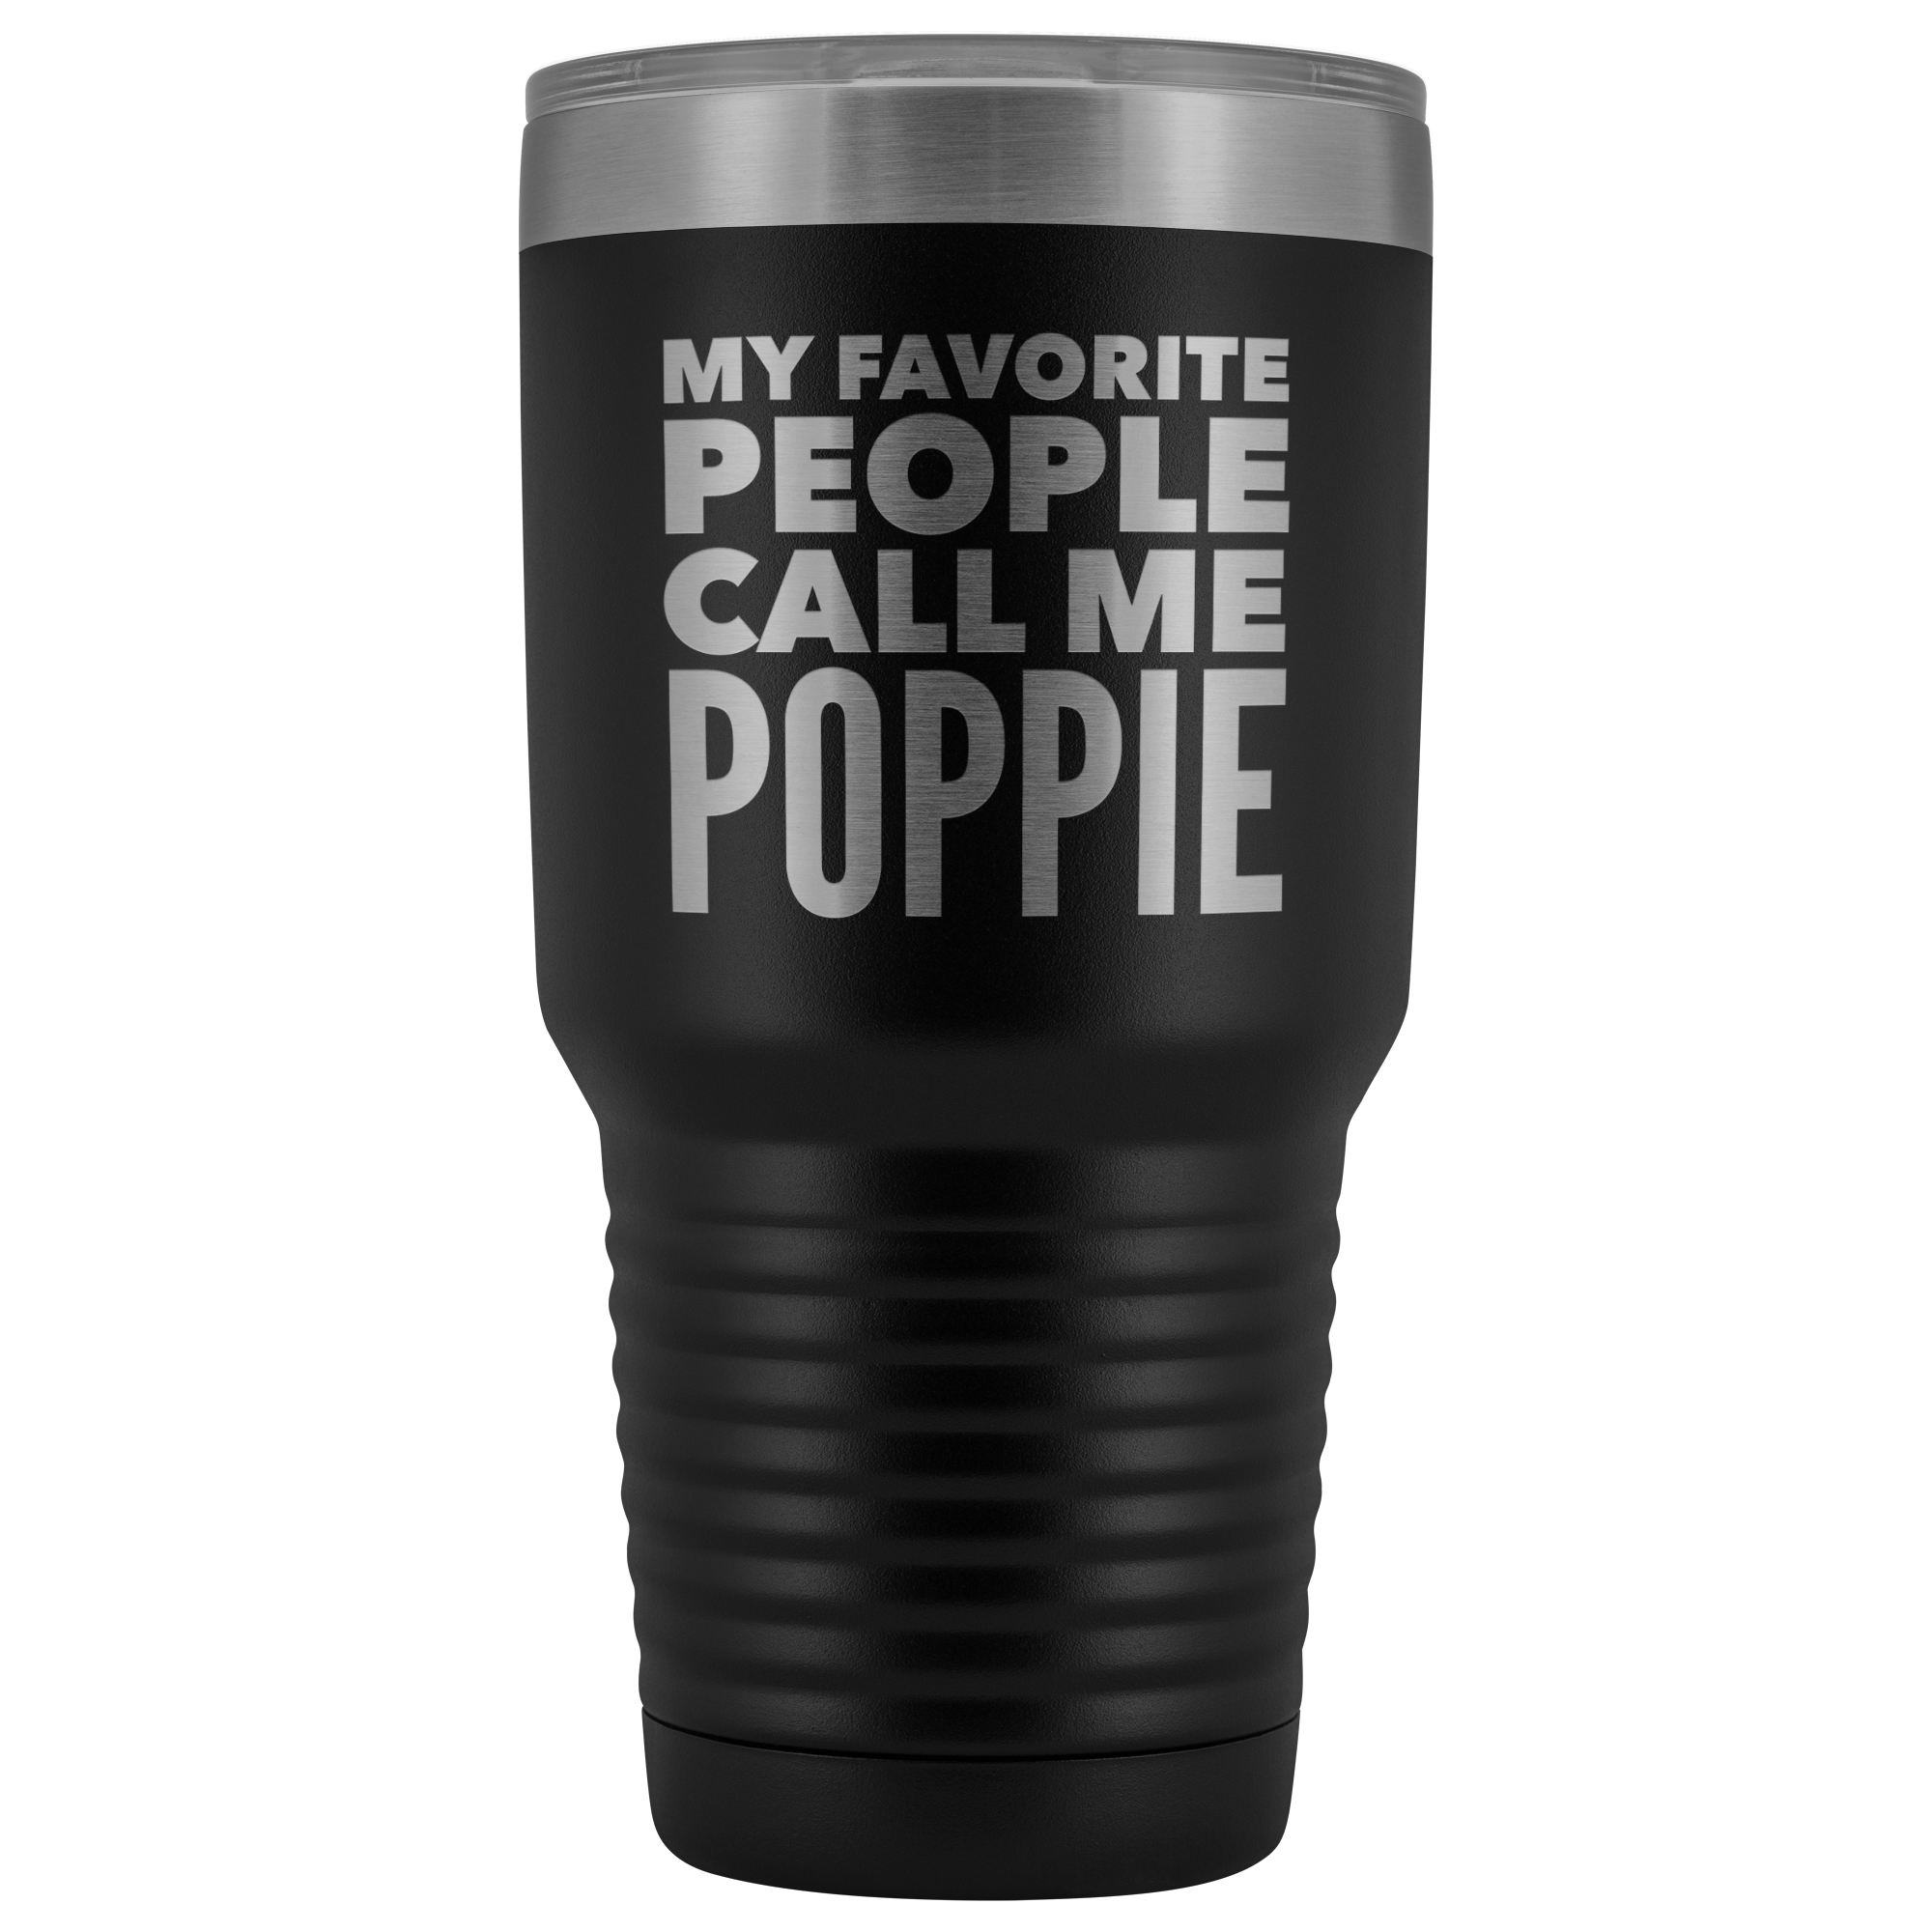 Poppie Tumbler Metal Mug Gift for Poppie Double Wall Vacuum Insulated Hot Cold Travel Cup 30oz BPA Free